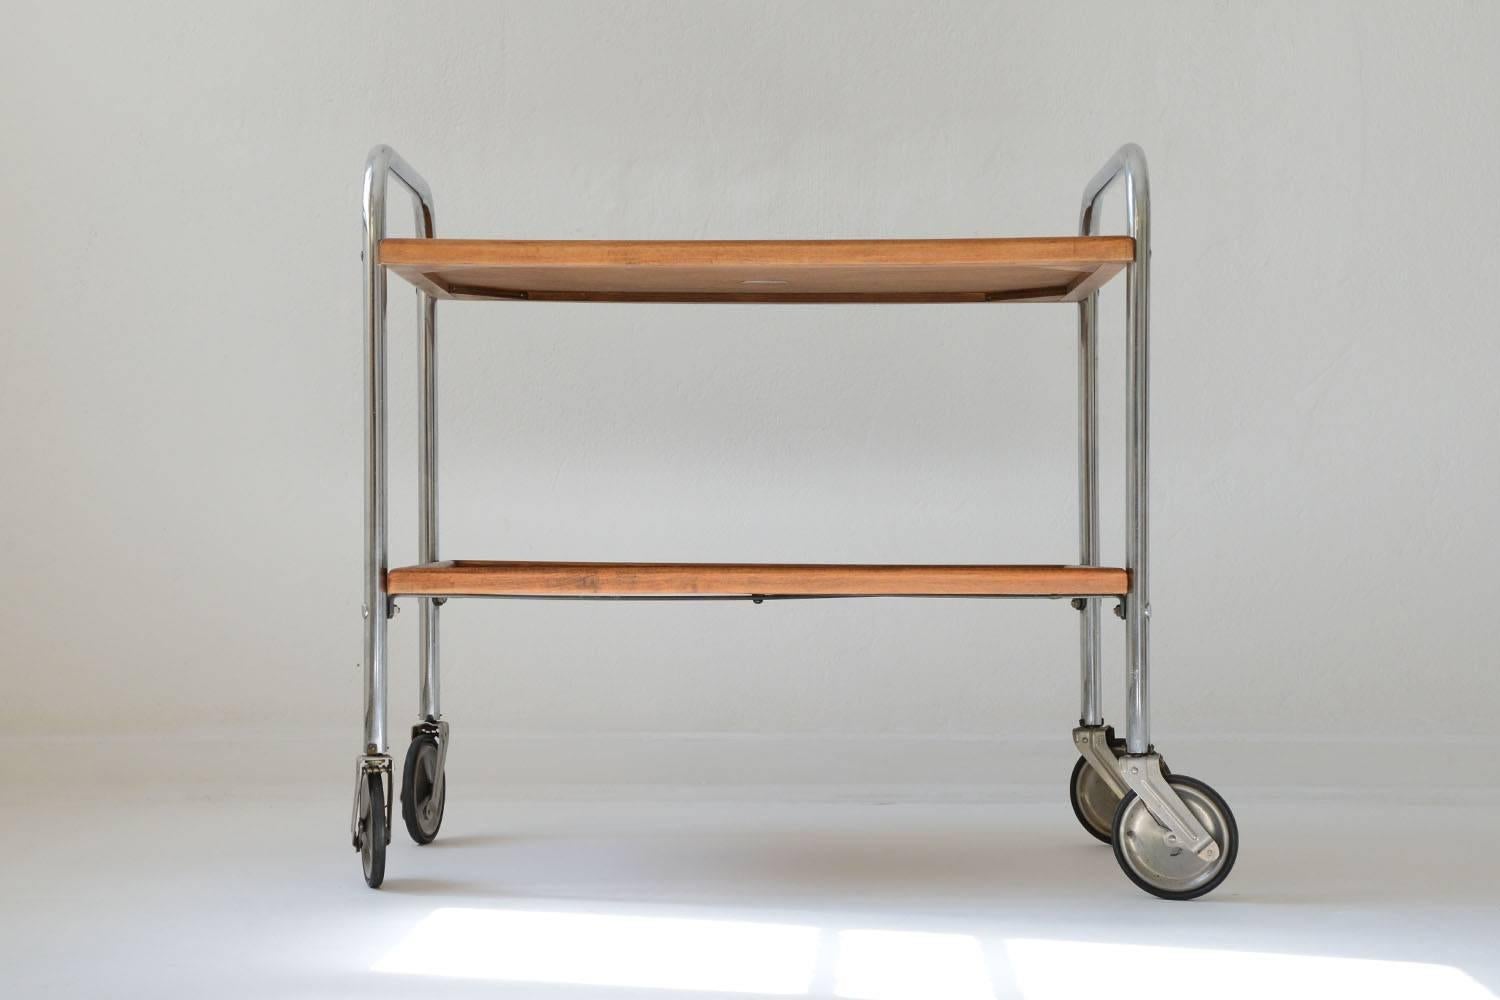 Very rare bar cart designed by Jacques Hitier and manufactured by Tubauto in the early 1950s. First used on cruise ships,
it was also presented at the Salon des arts menagers in 1954

The Bar cart has a suspension system 

Reference: Jacques